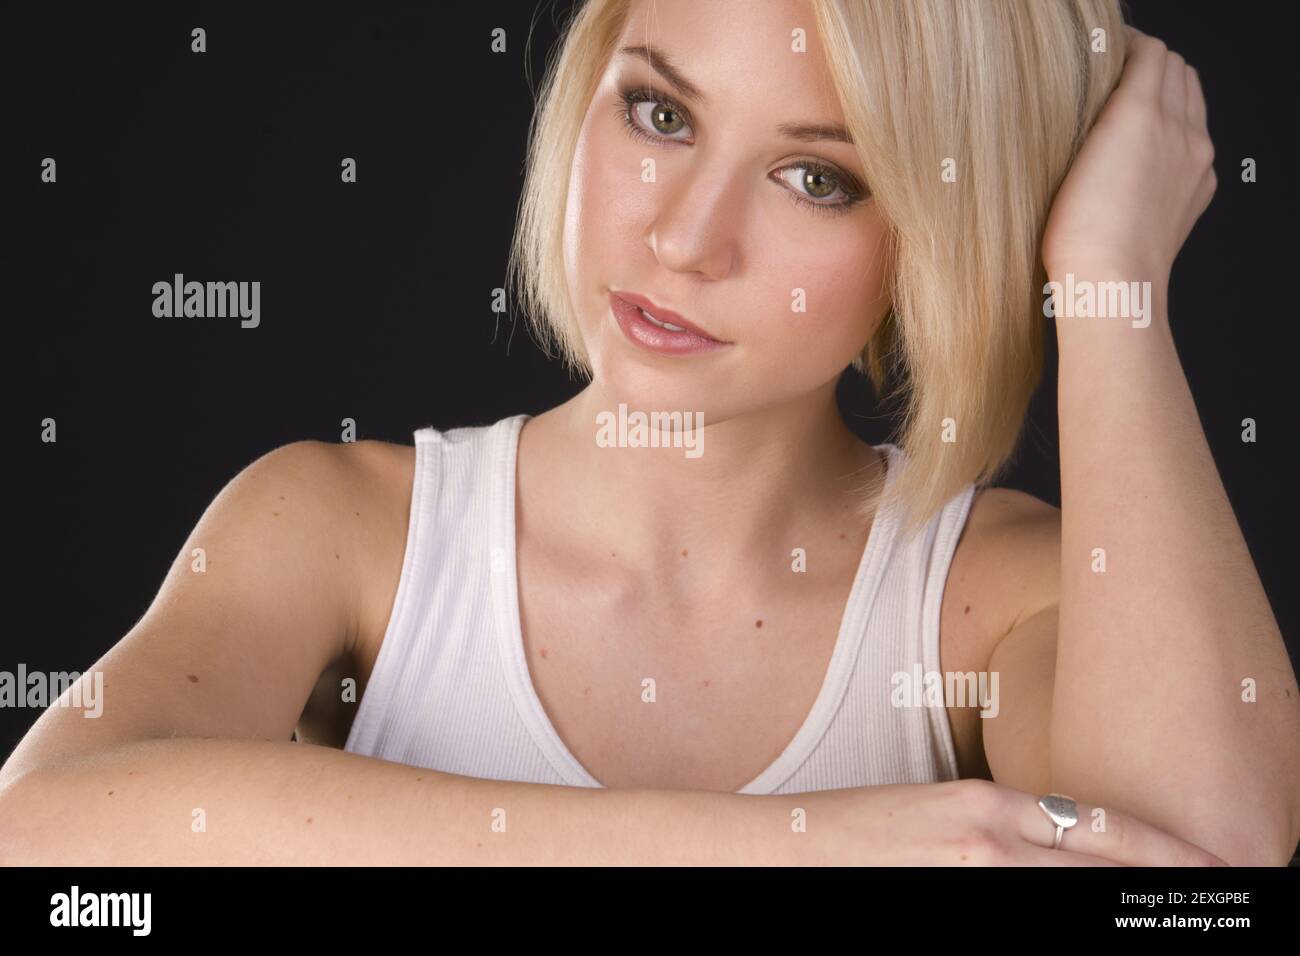 Candid Blonde Stock Photo